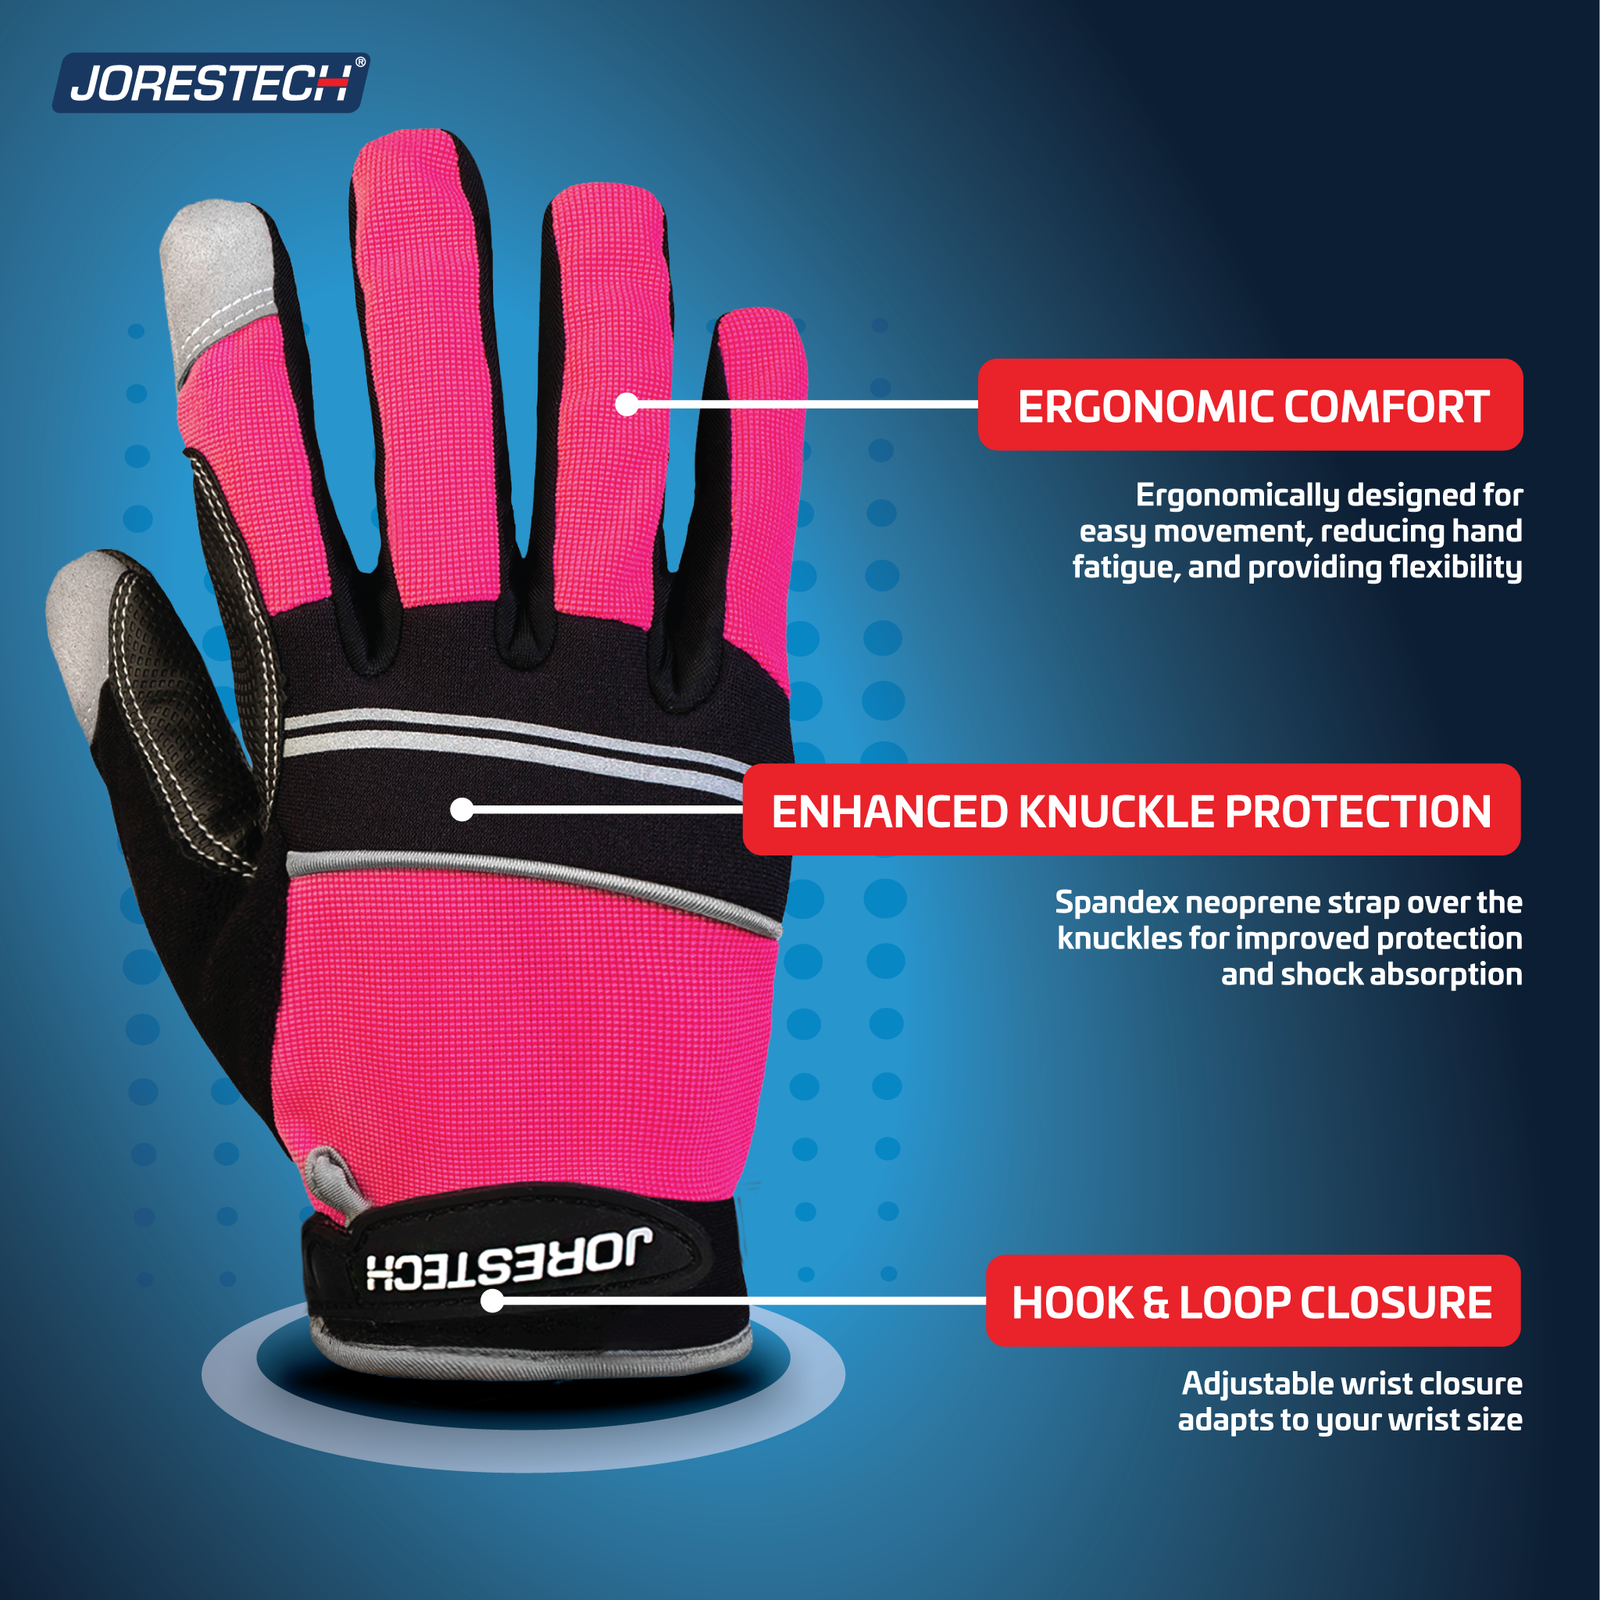 Text reads: Work gloves ergonomically designed to reduce hand fatigue. Enhanced knuckle protection with spandex neoprene strap. Hook and loop closure to adapt to wrist size